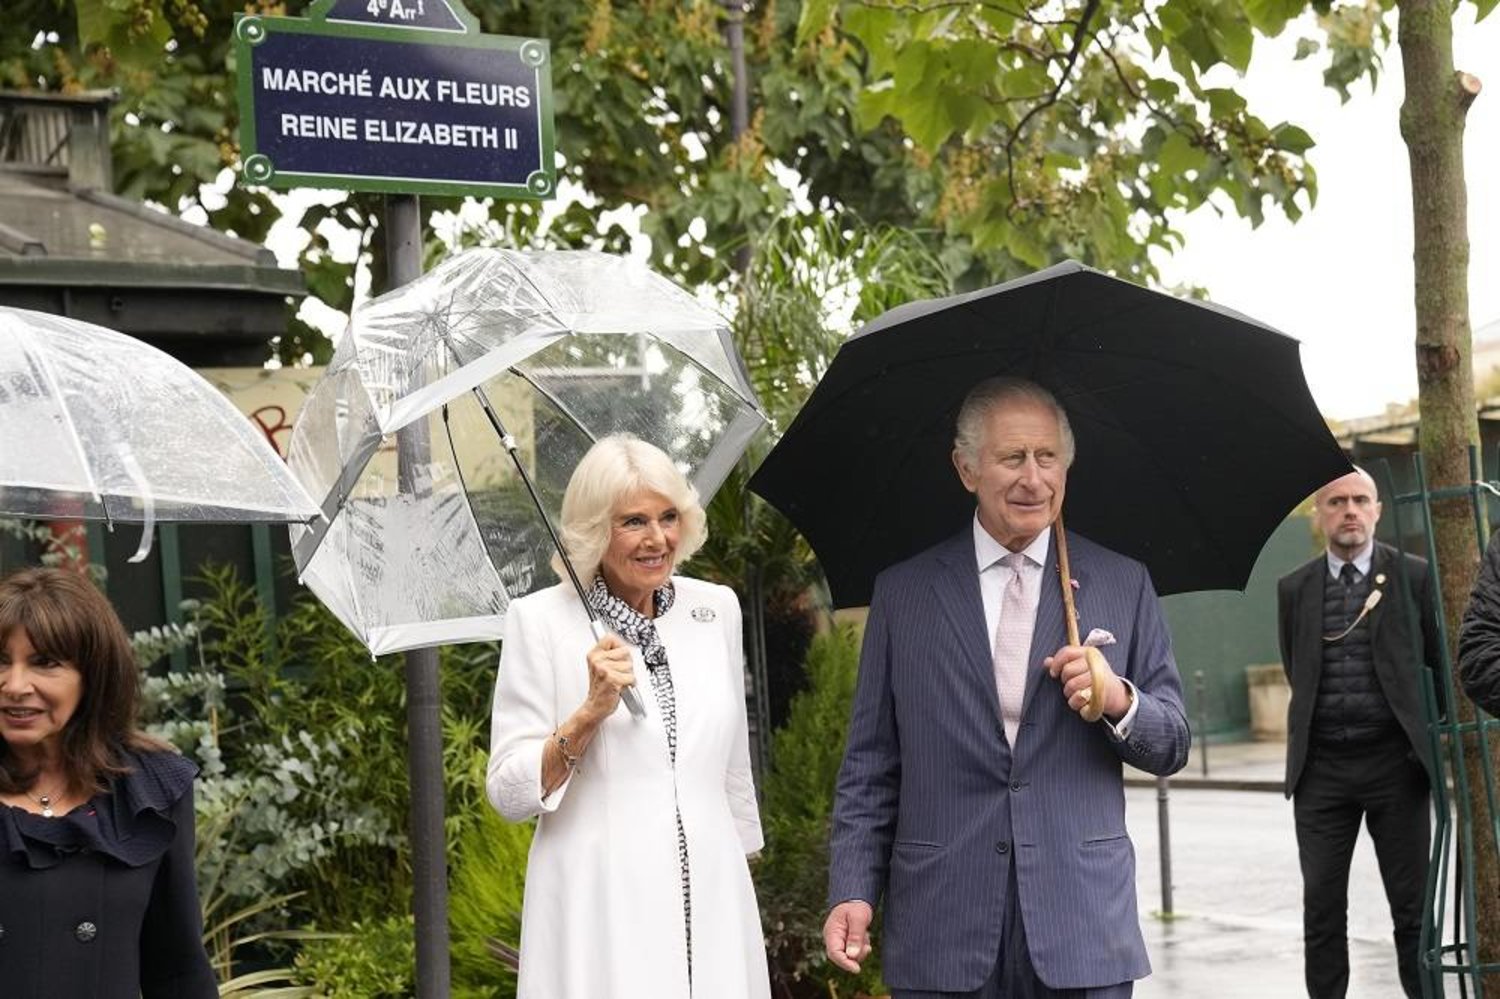 Britain's King Charles III and Queen Camilla pose at a plaque named after his late mother, Queen Elizabeth II at the Flower Market Thursday, Sept. 21, 2023 in Paris. (AP)